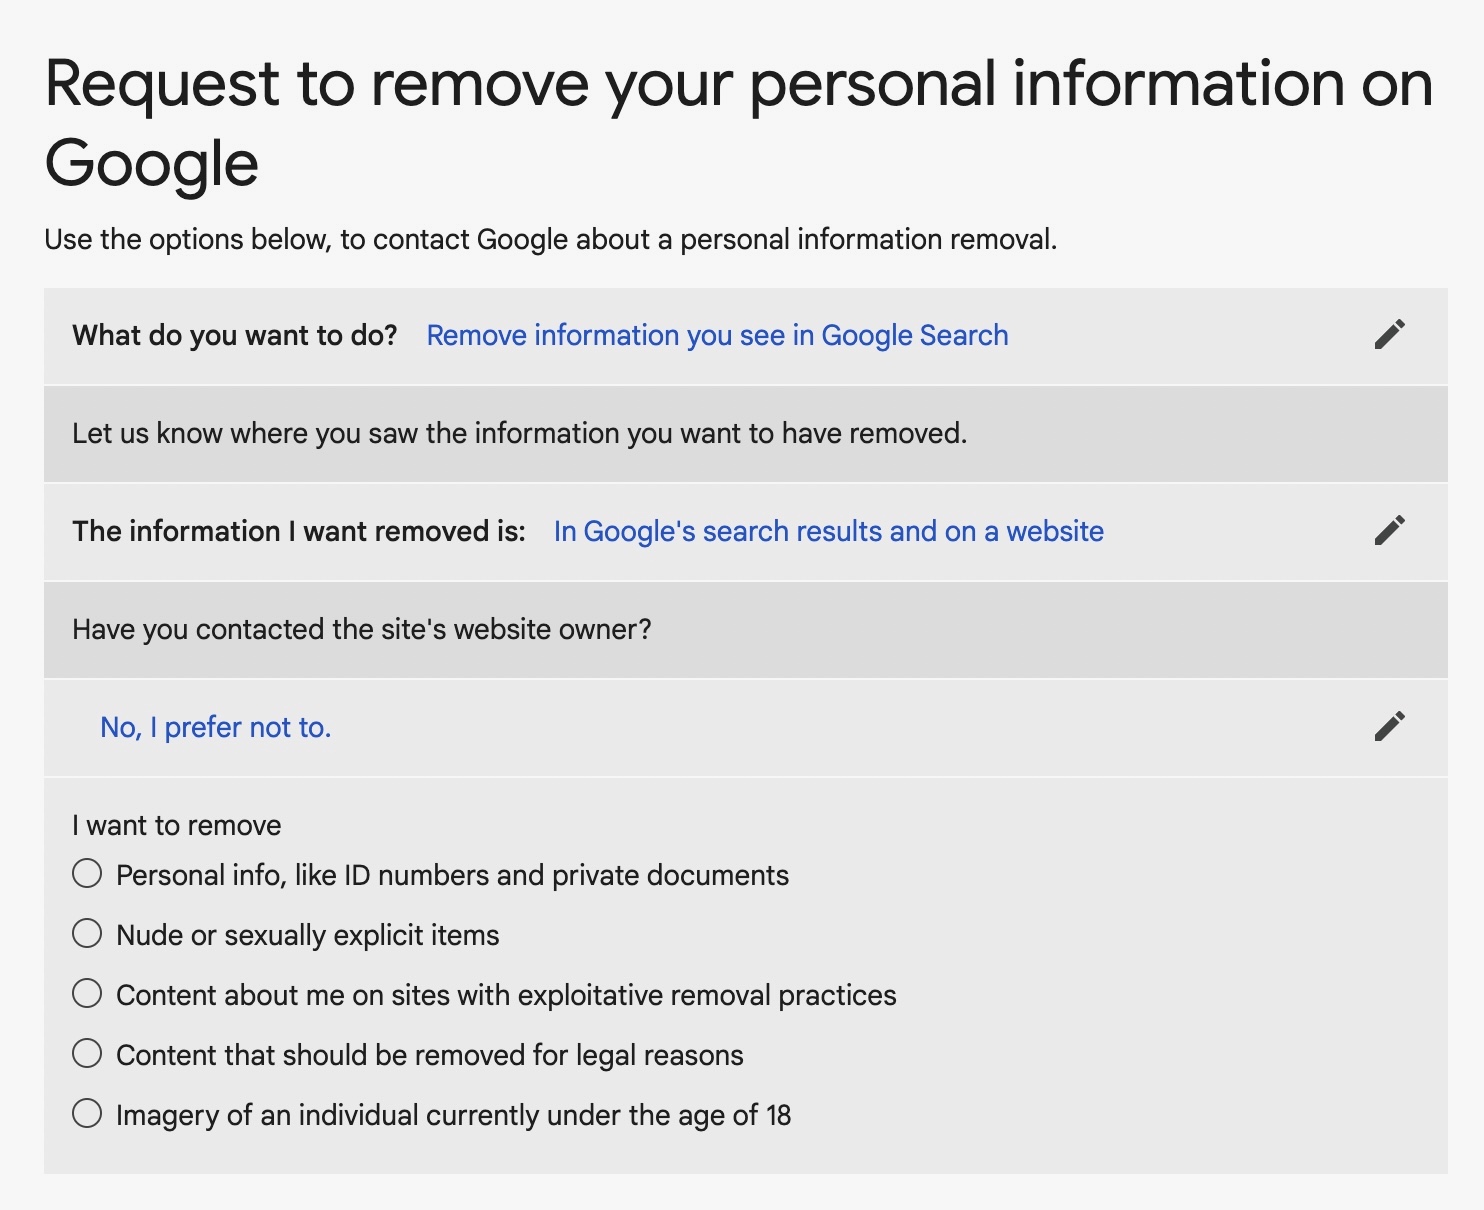 Ask Google to remove your personal information from Google search